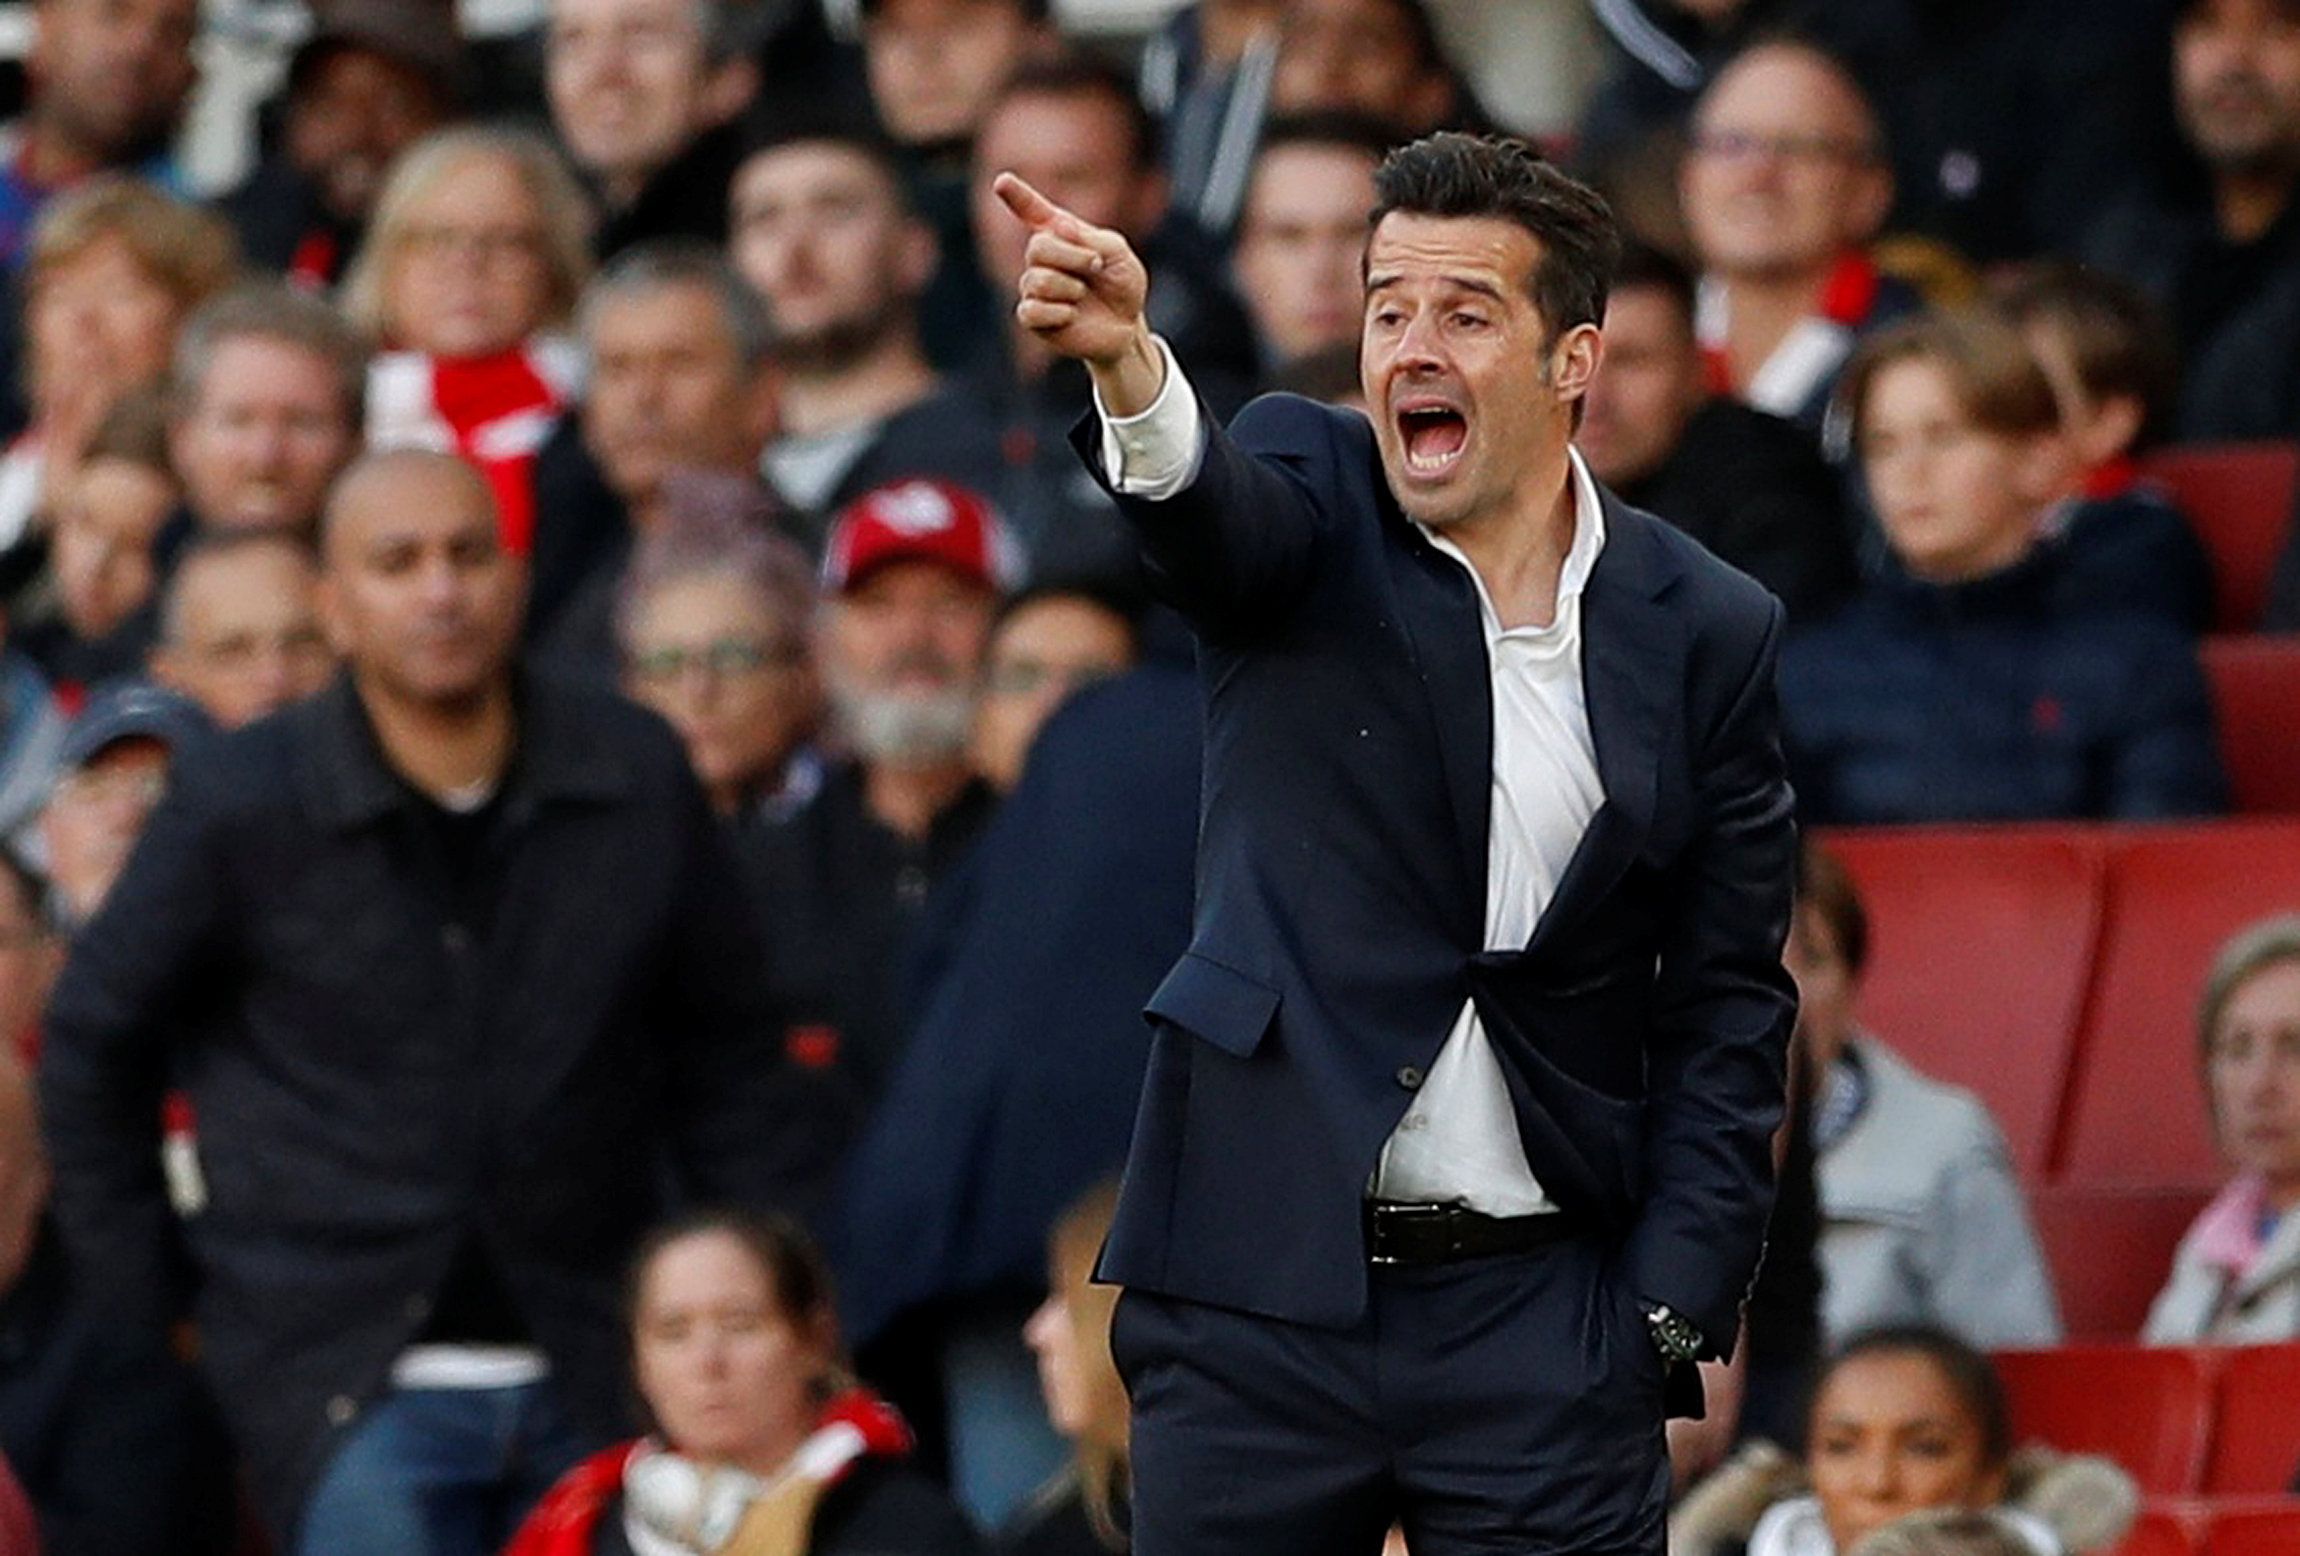 Soccer Football - Premier League - Arsenal v Everton - Emirates Stadium, London, Britain - September 23, 2018  Everton manager Marco Silva reacts during the match                       Action Images via Reuters/John Sibley  EDITORIAL USE ONLY. No use with unauthorized audio, video, data, fixture lists, club/league logos or 